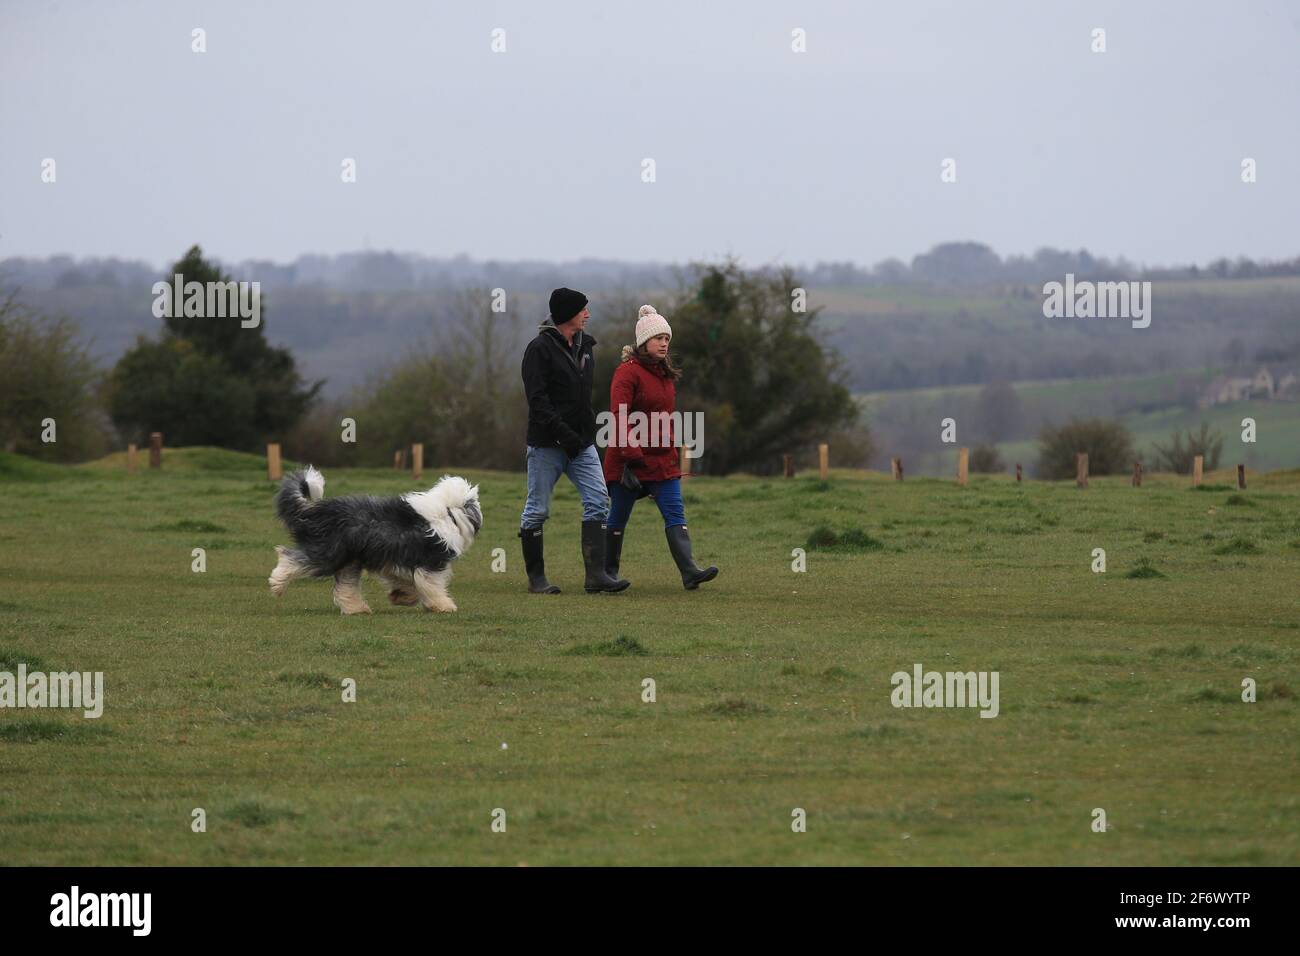 Stroud, UK, 3rd April, 2021. UK Weather. Overcast skies with chilly winds as the walkers on Rodborough Common wrap up after warm temperatures earlier in the week. Gloucestershire. UK. Stock Photo